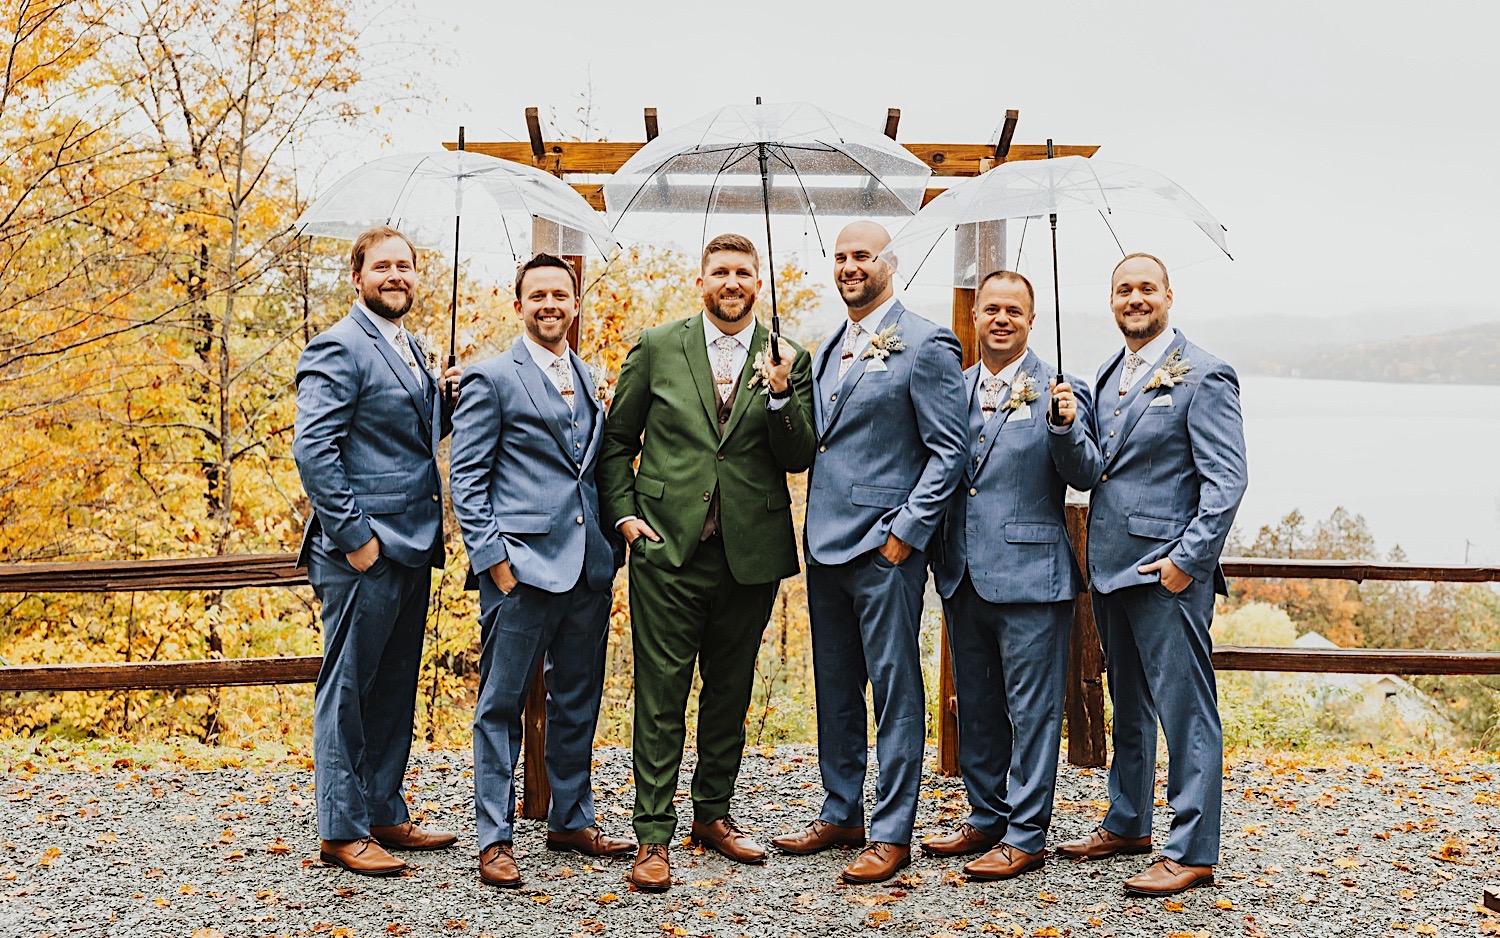 A groom stands with his 5 groomsmen for a portrait photo in the rain at the outdoor ceremony space of Lake Bomoseen Lodge in Vermont